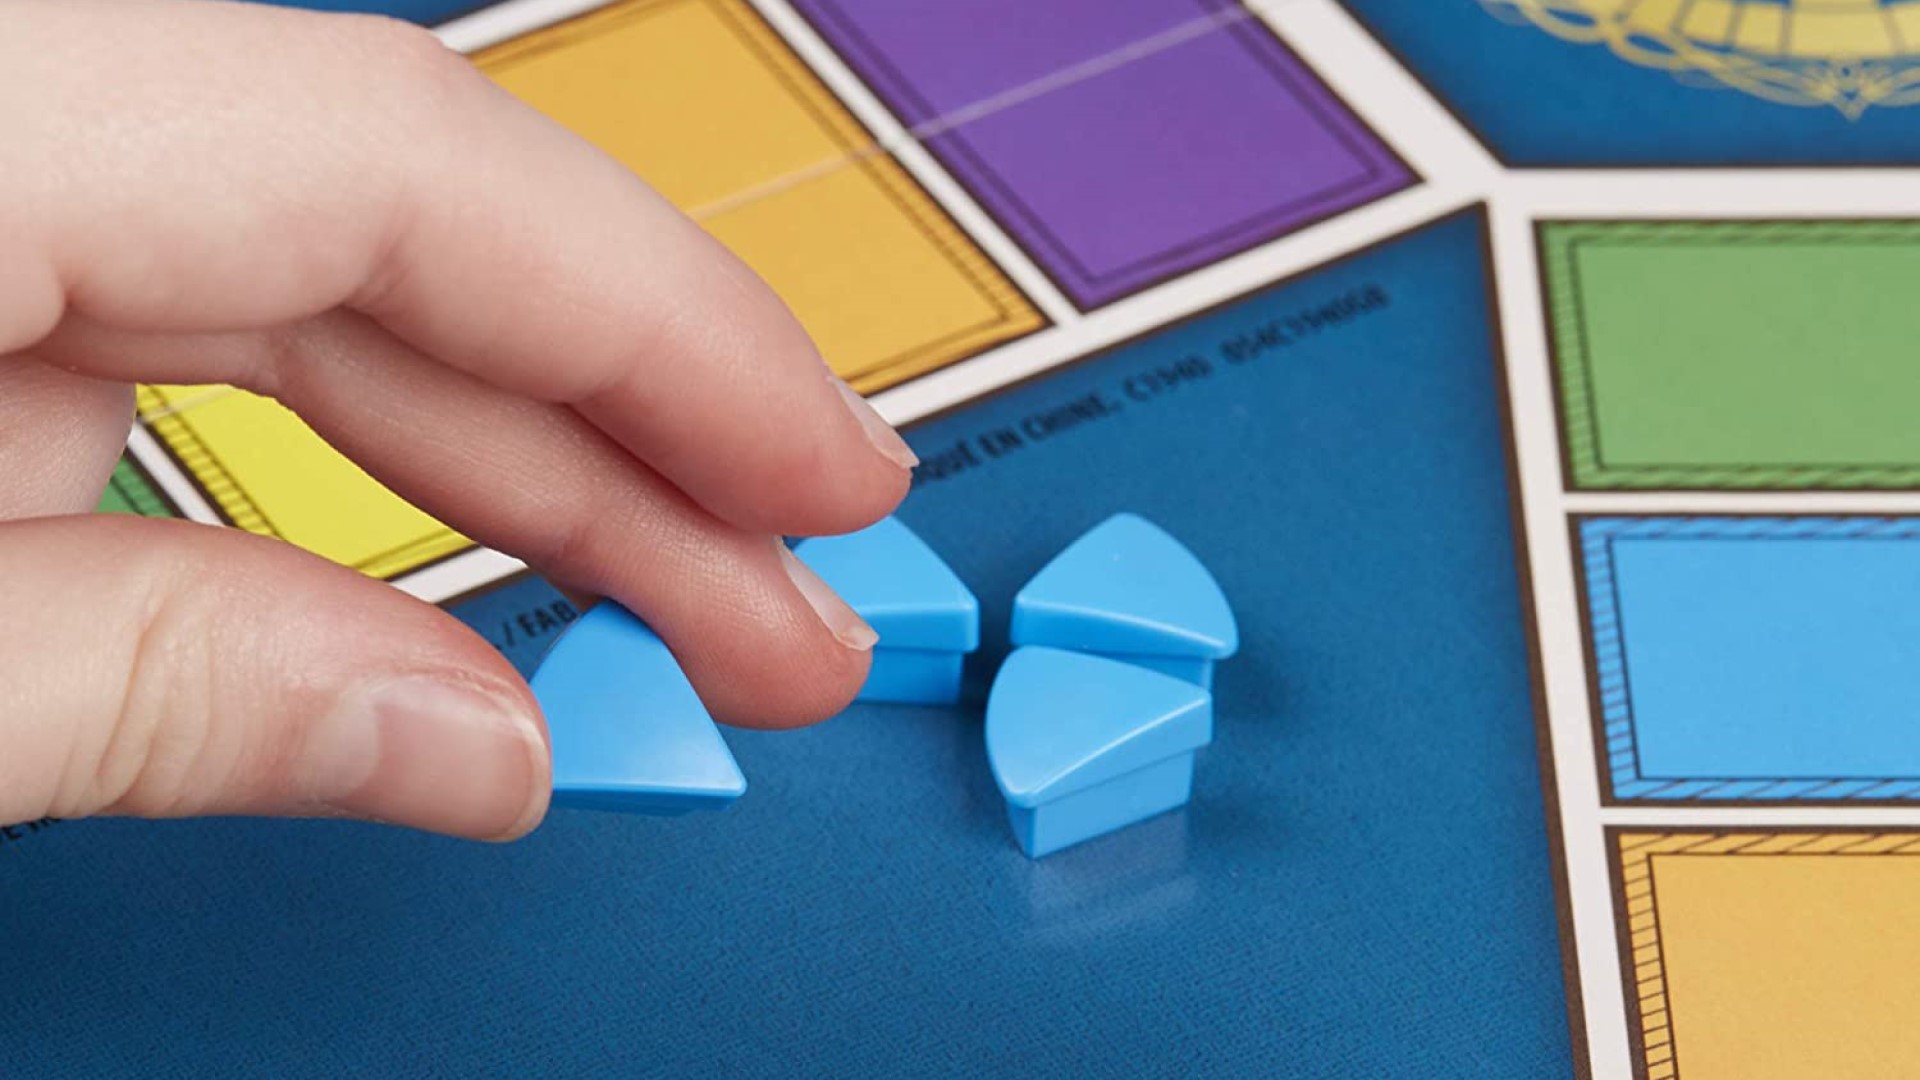 Best classic board games: Trivial Pursuit. Image shows a a hand reaching over a Trivial Pursuit board for some light blue segment pieces.